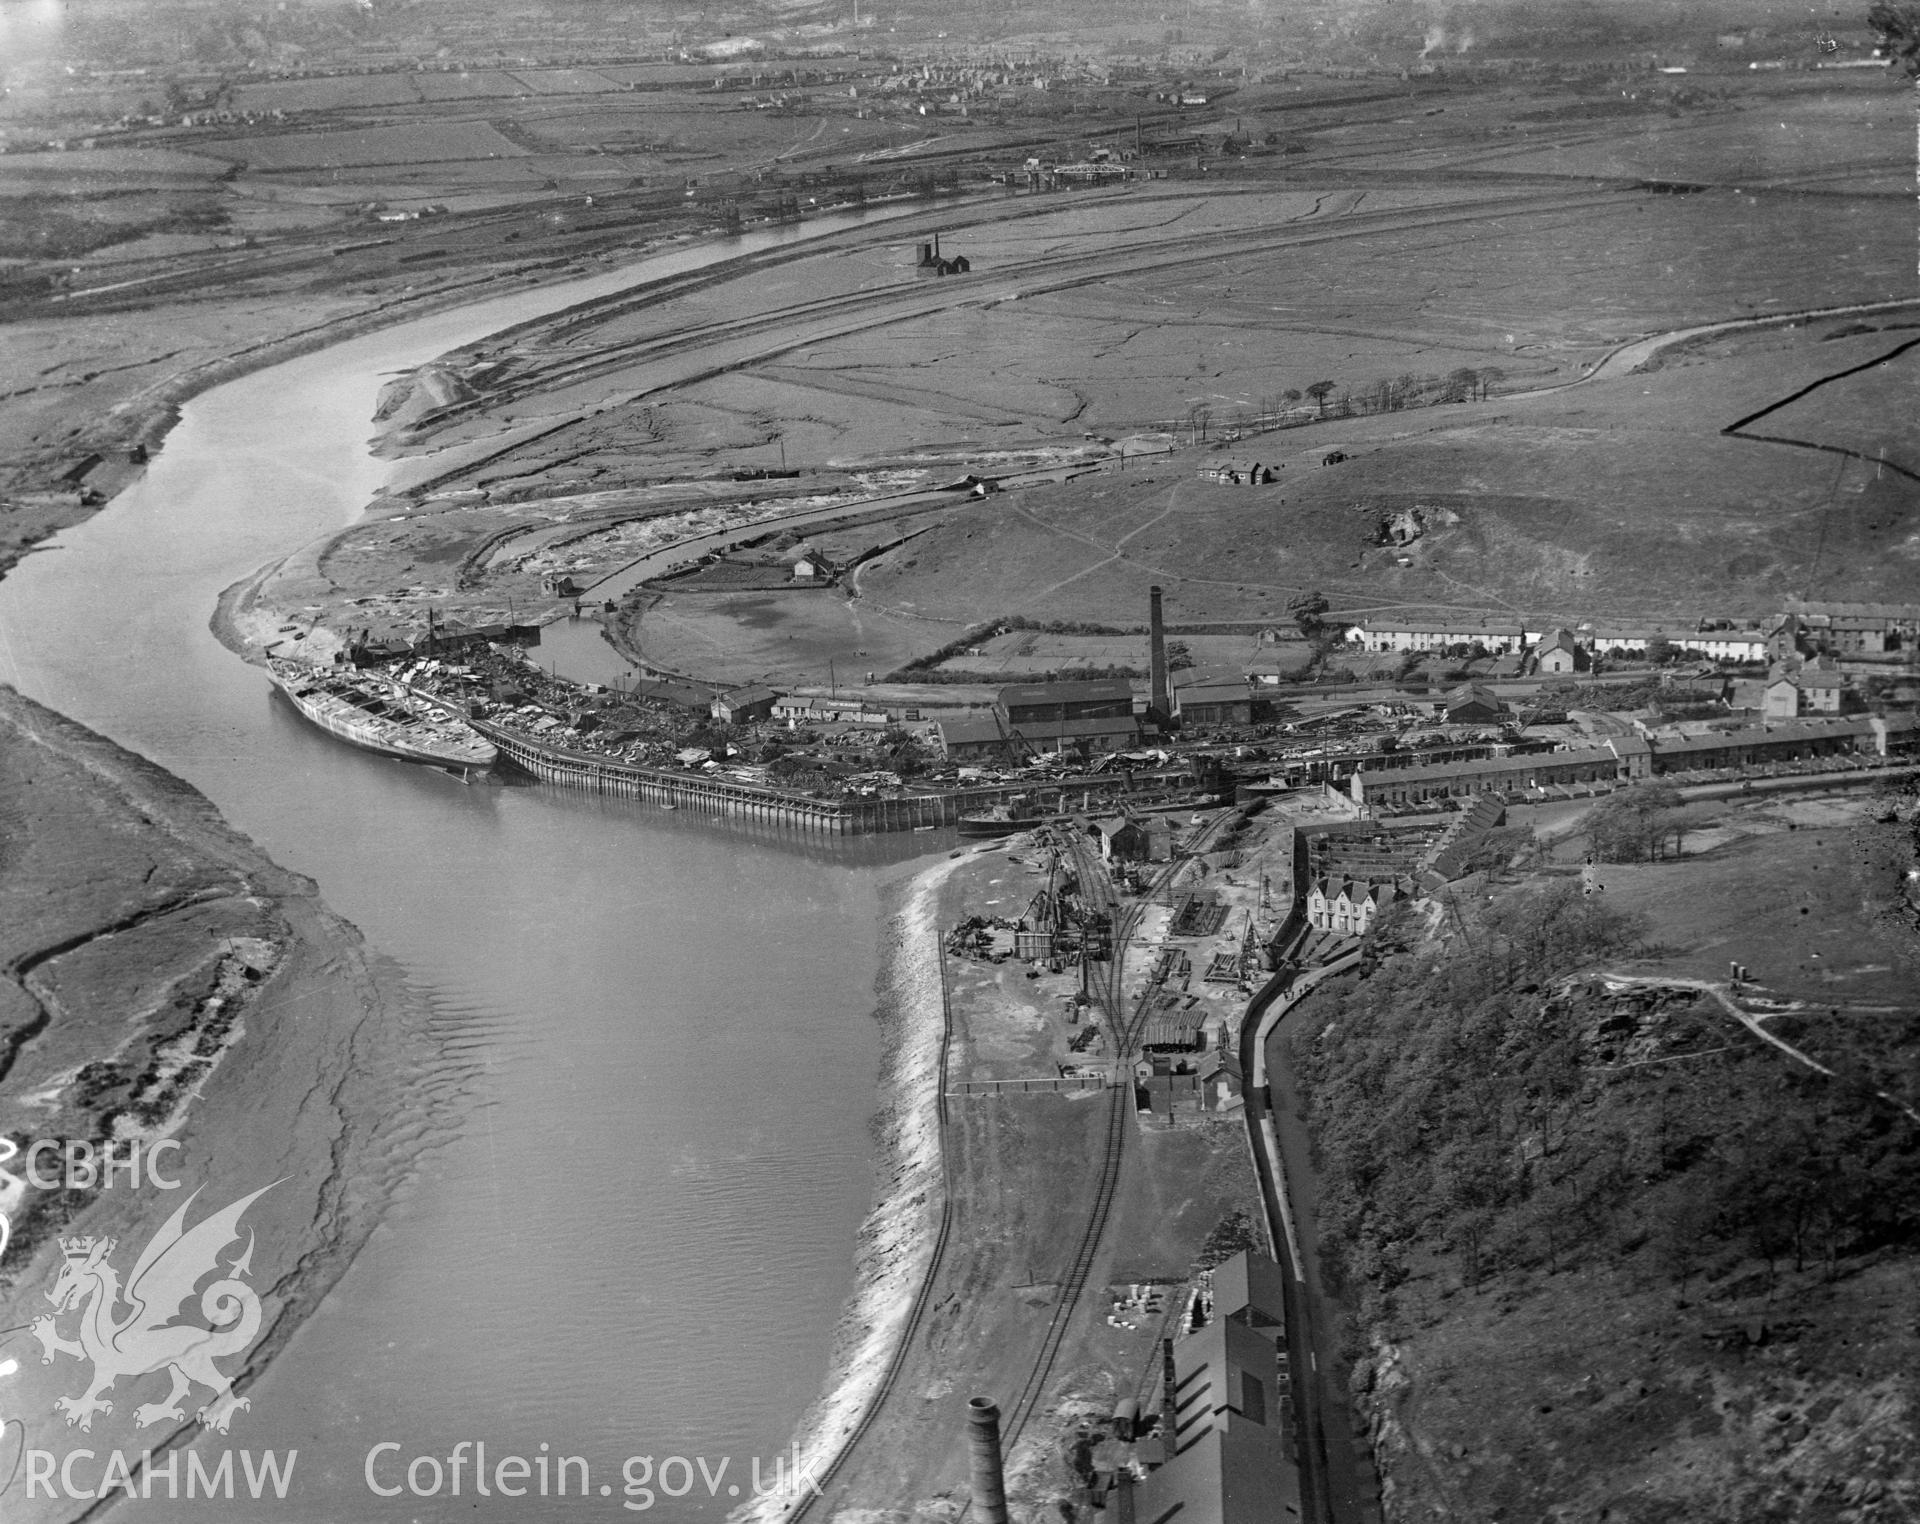 Black and white oblique aerial photograph showing the docks at Briton Ferry, from Aerofilms album Glamorgan A-B (W18), taken by Aerofilms Ltd and dated 1921.